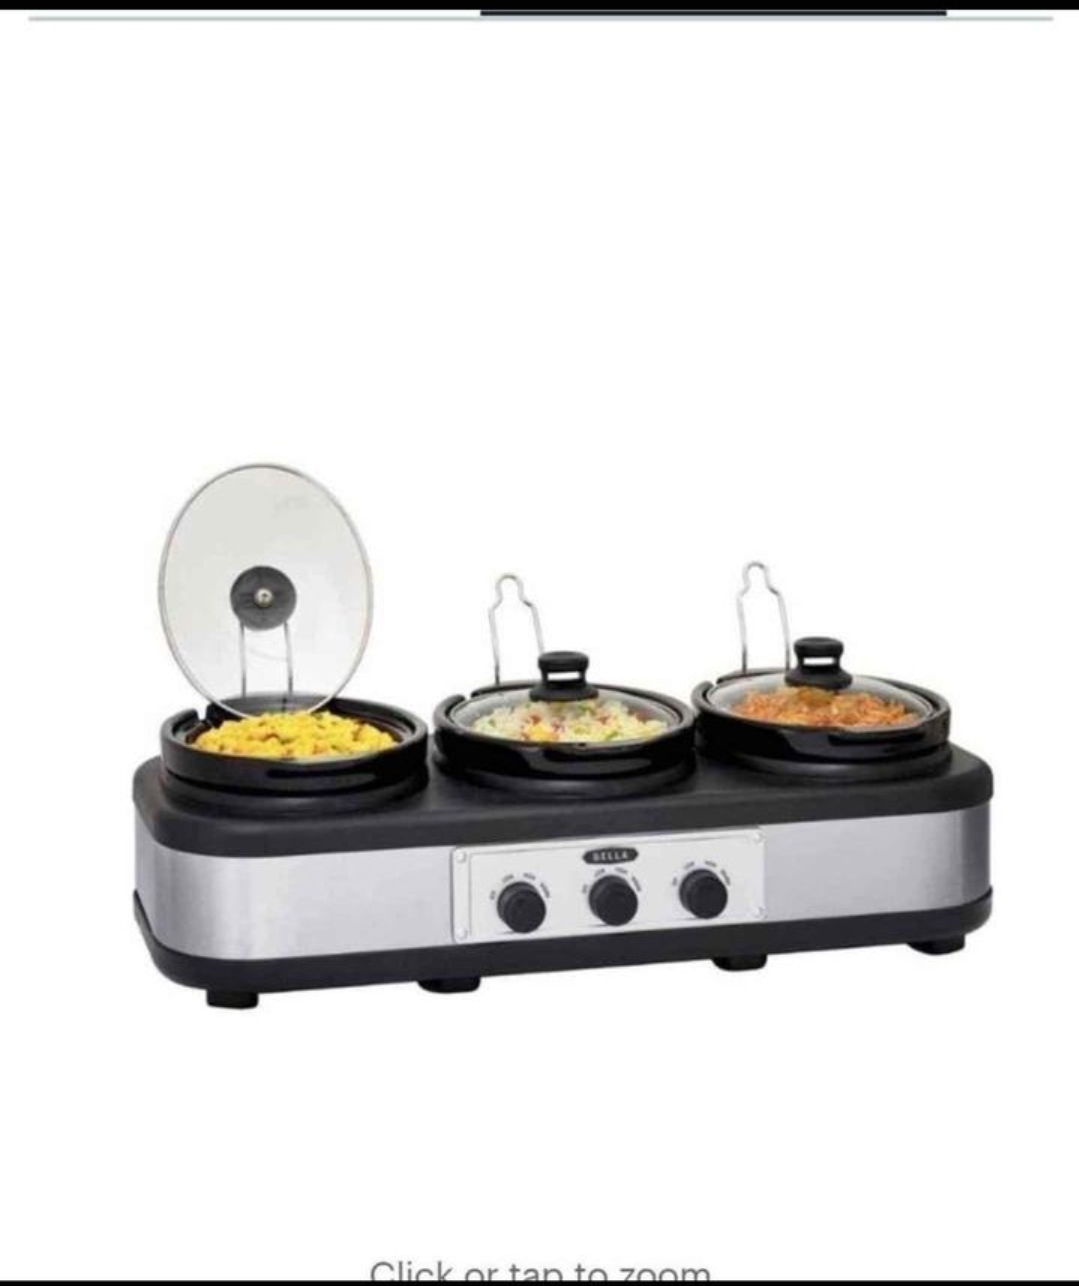 Bella 3x2.5 quart Triple Slow Cooker Stainless Steel/Black Boxes not in perfect condition - image 1 of 5